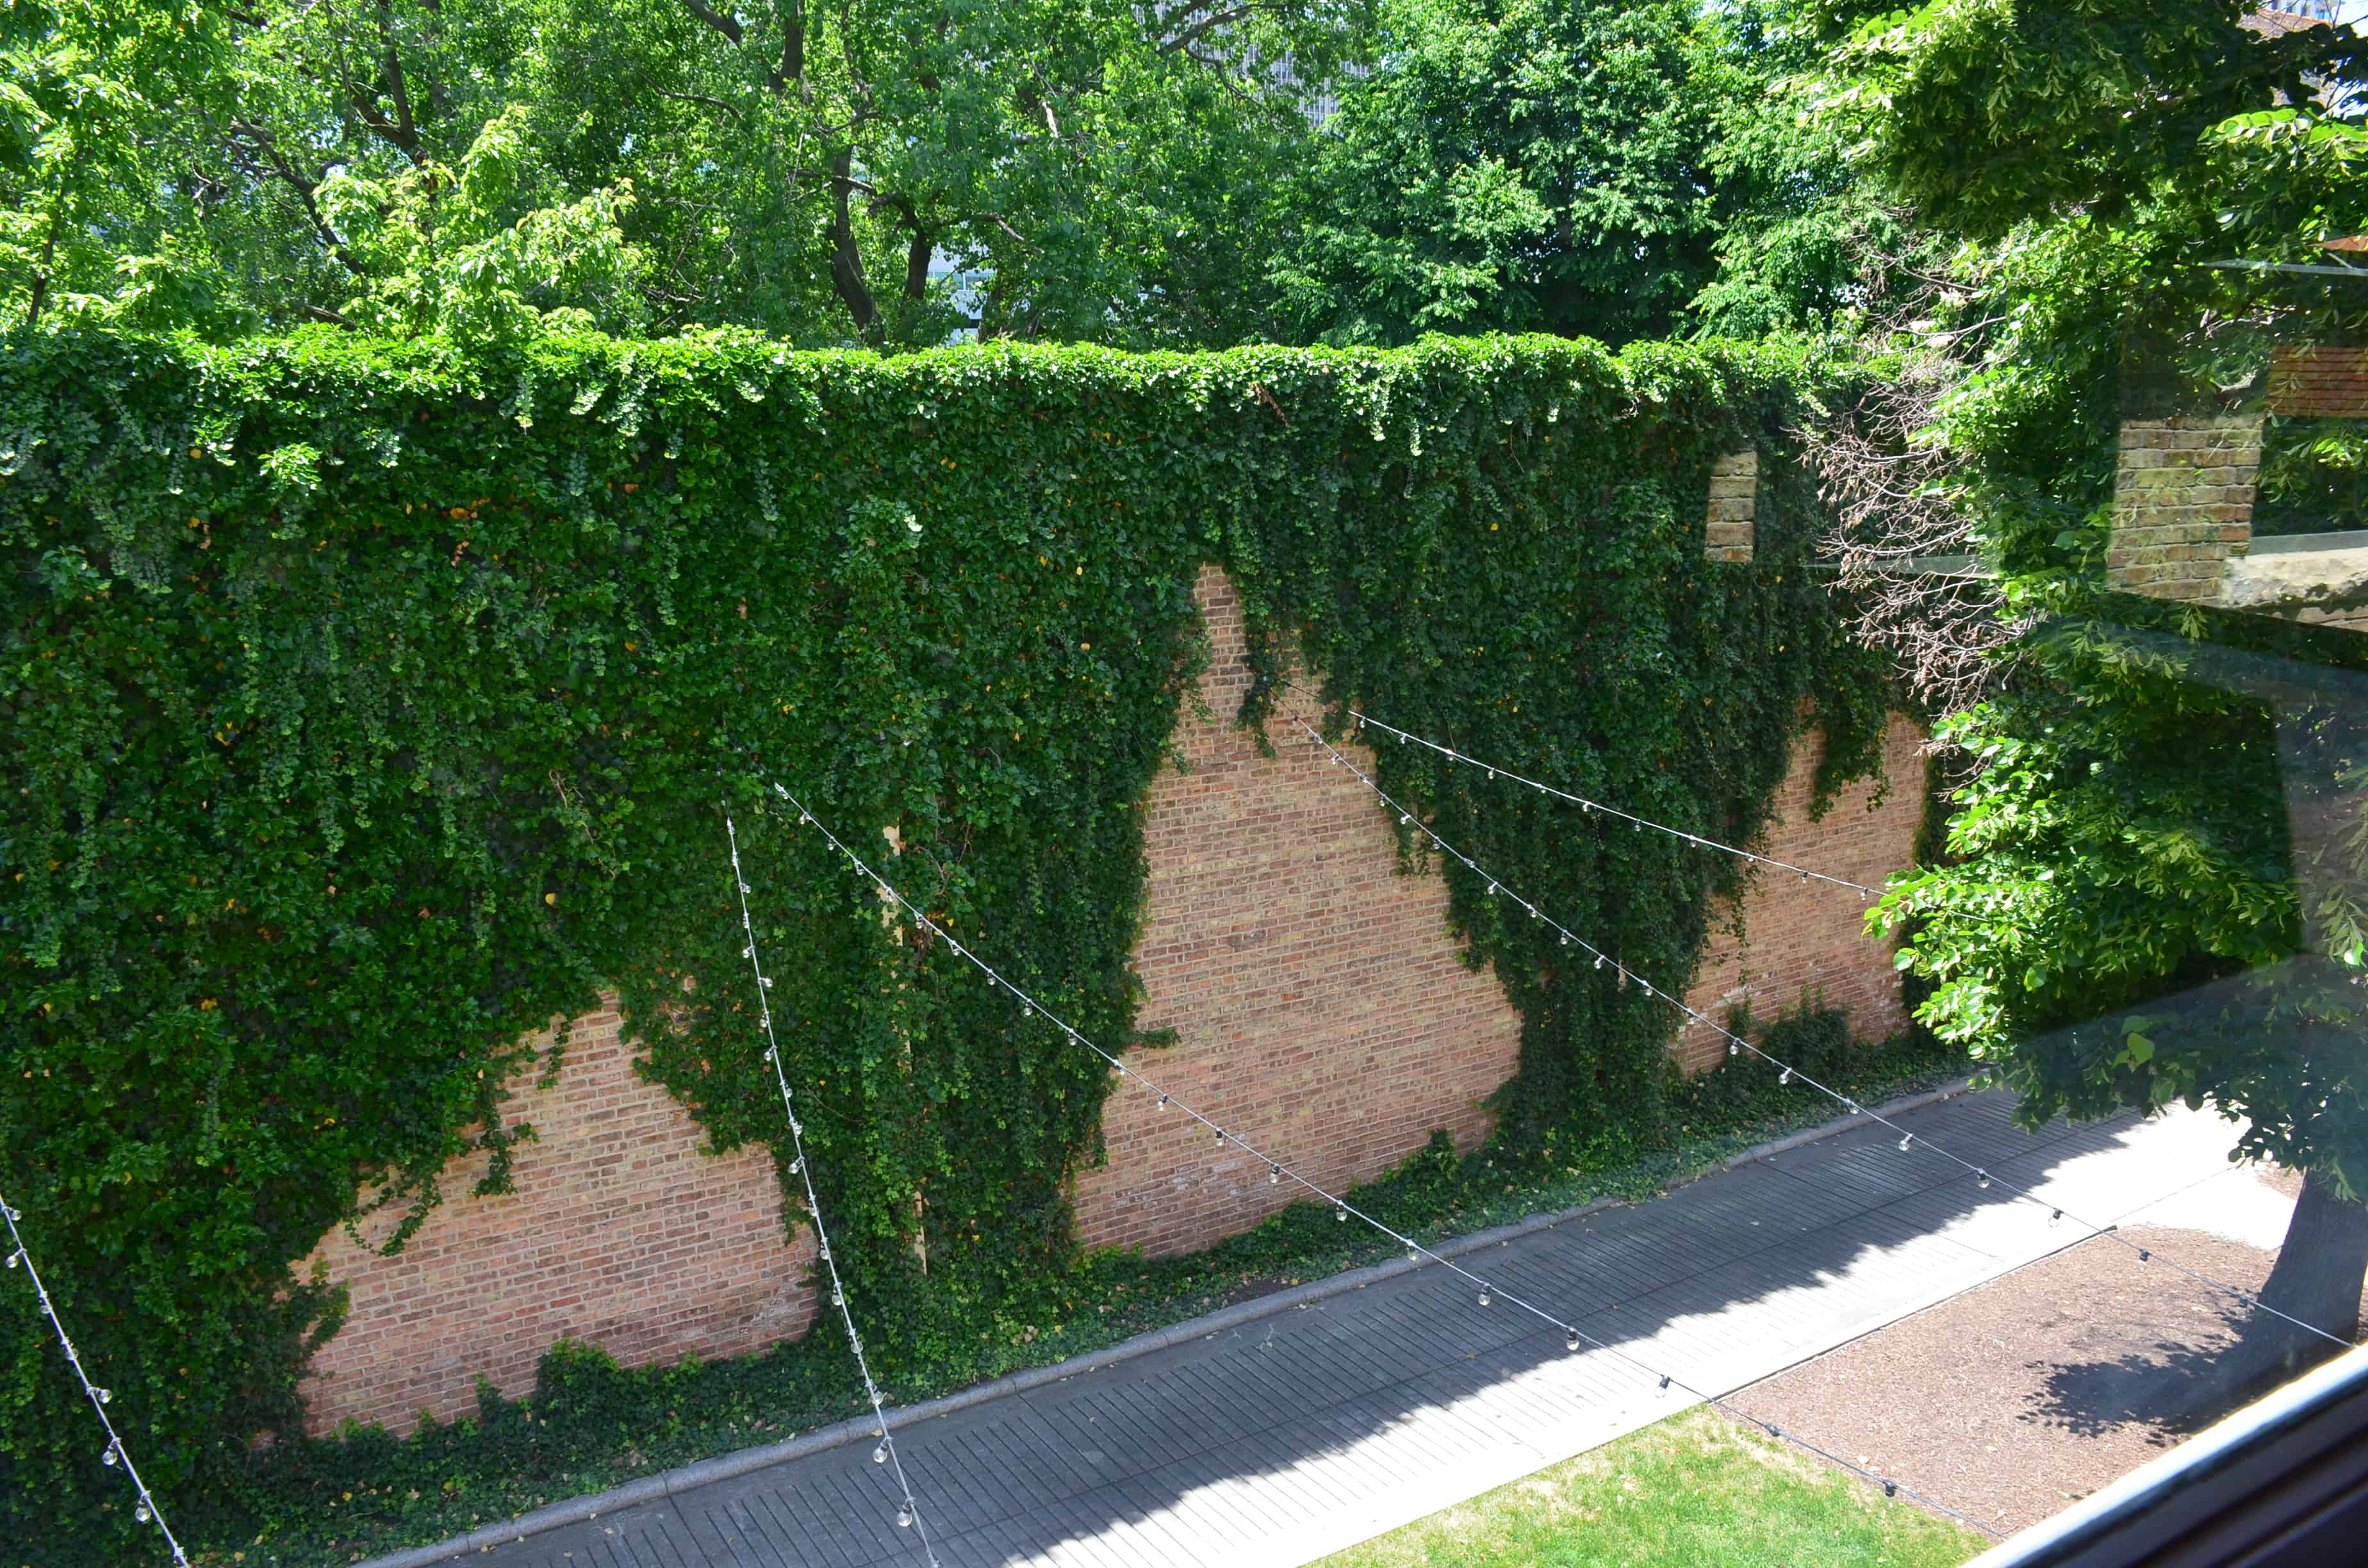 Ivy at the John J. Glessner House in Chicago, Illinois